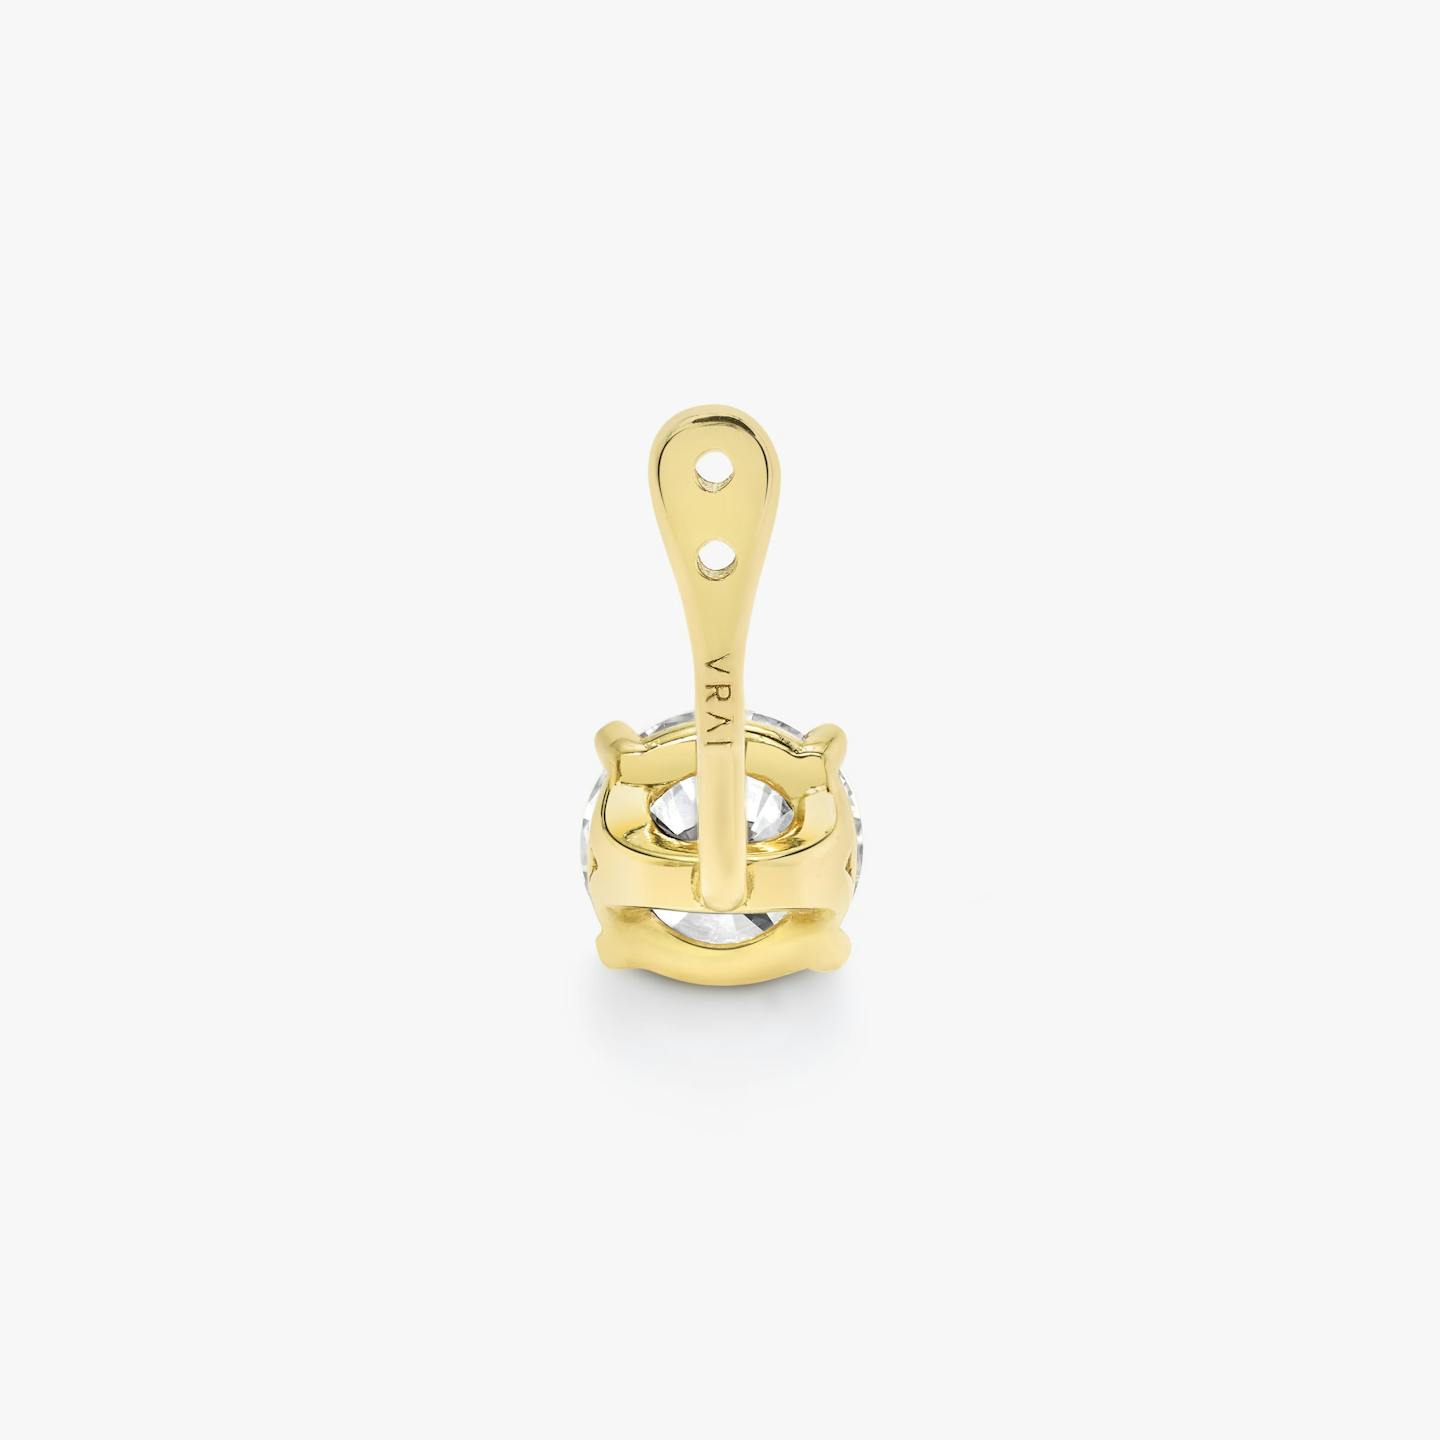 VRAI Solitaire Drop Ear Jacket | Round Brilliant | 14k | 18k Yellow Gold | Carat weight: 1/2